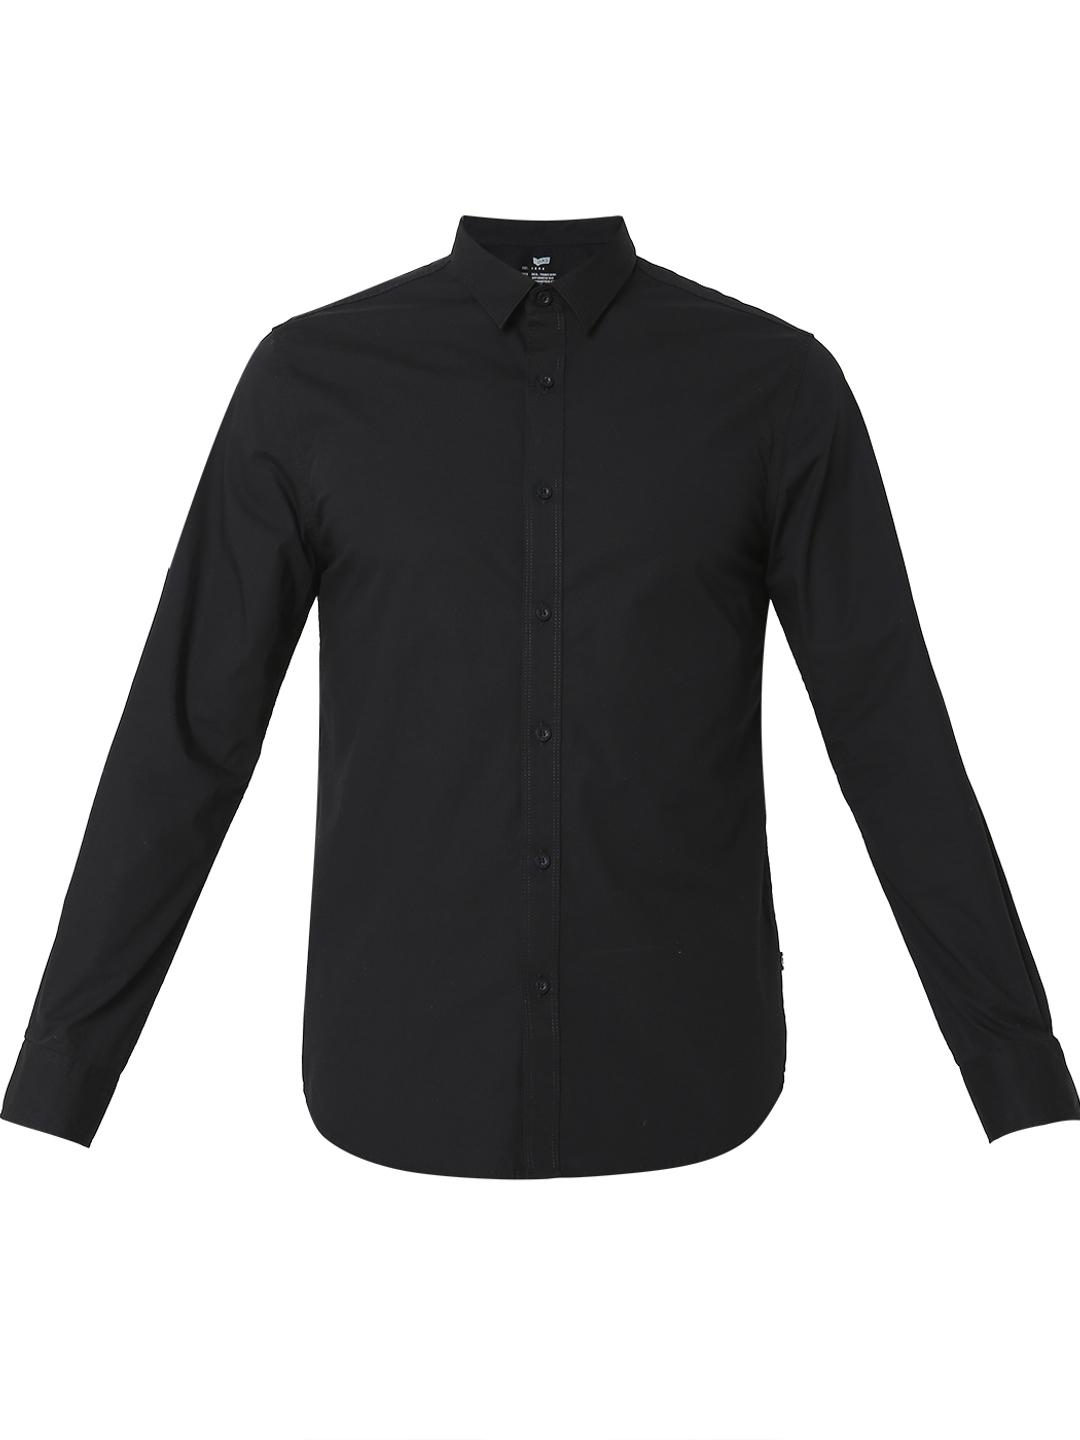 Slim Fit Solid Full Sleeve Shirt with Classic Collar